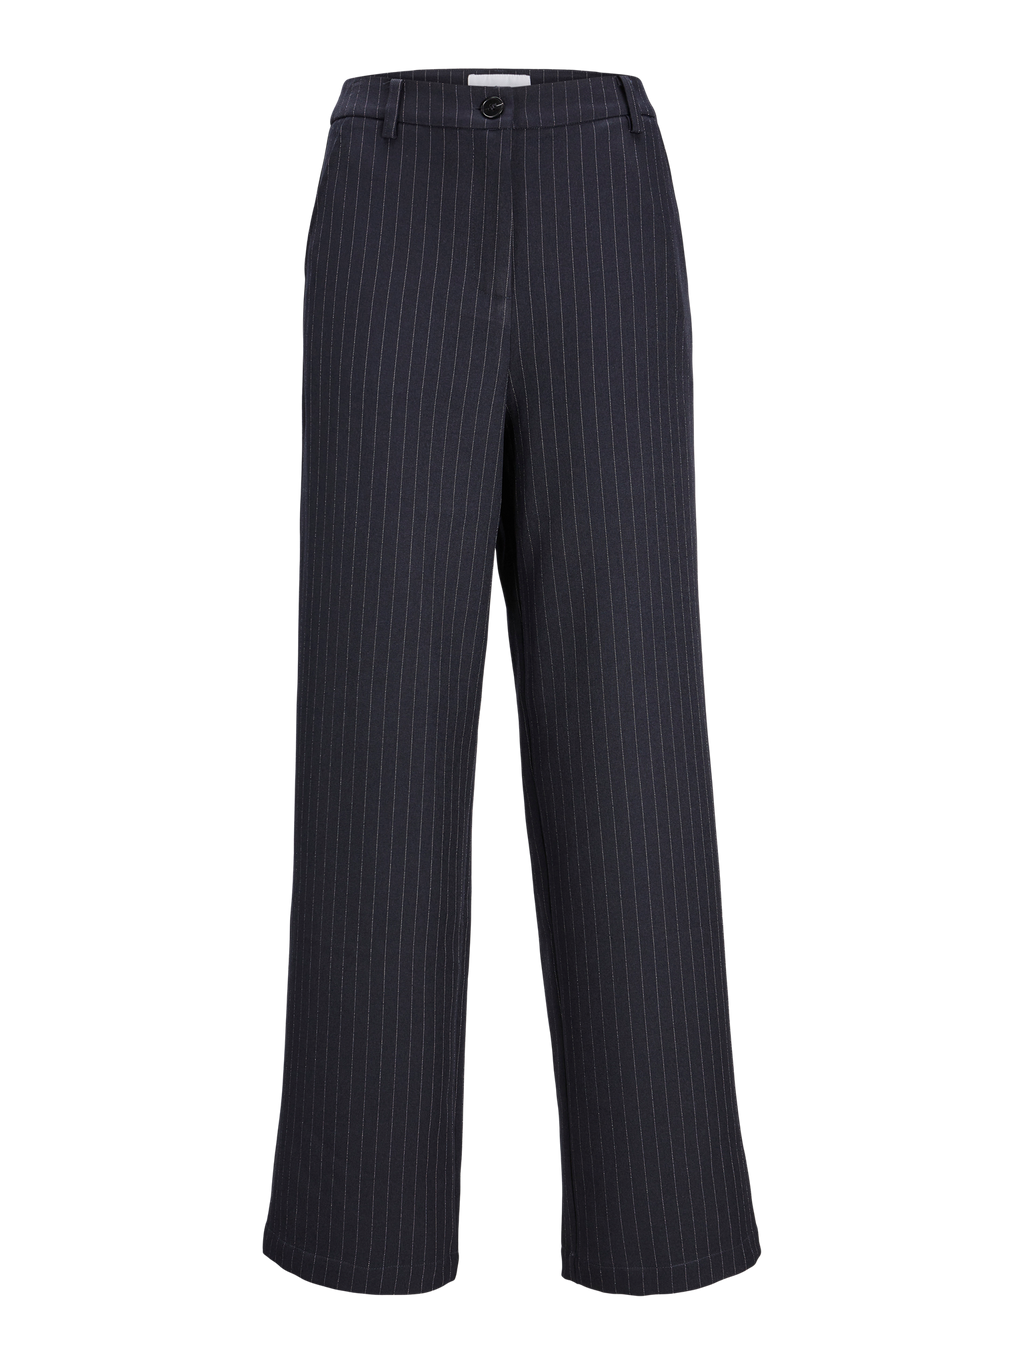 Oversized Blazer with Classic Suit Trousers - Package Deal (Navy Pinstripe)